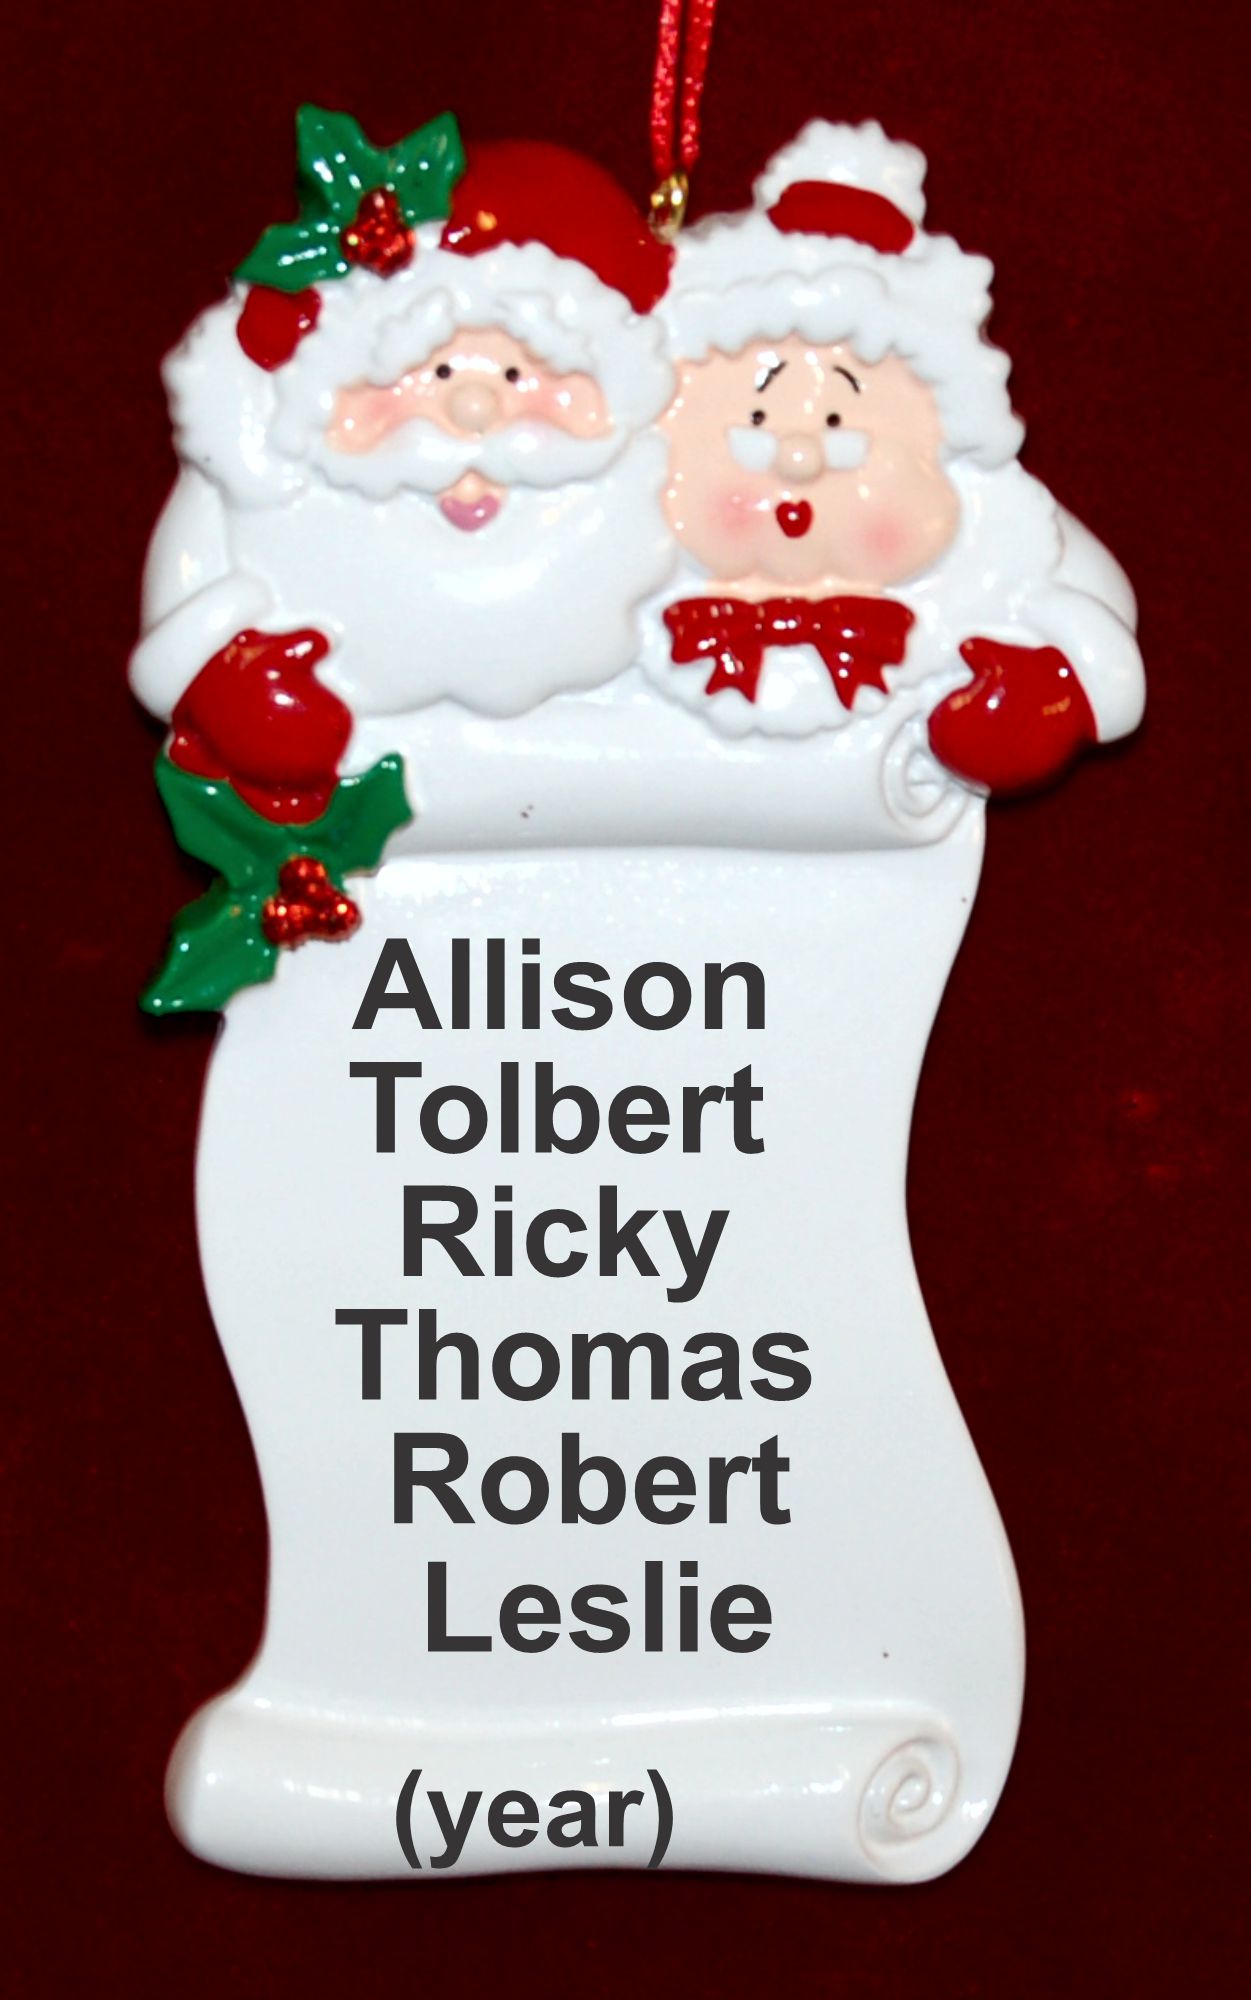 Nana's Good List Christmas Ornament up to 6 Personalized by RussellRhodes.com